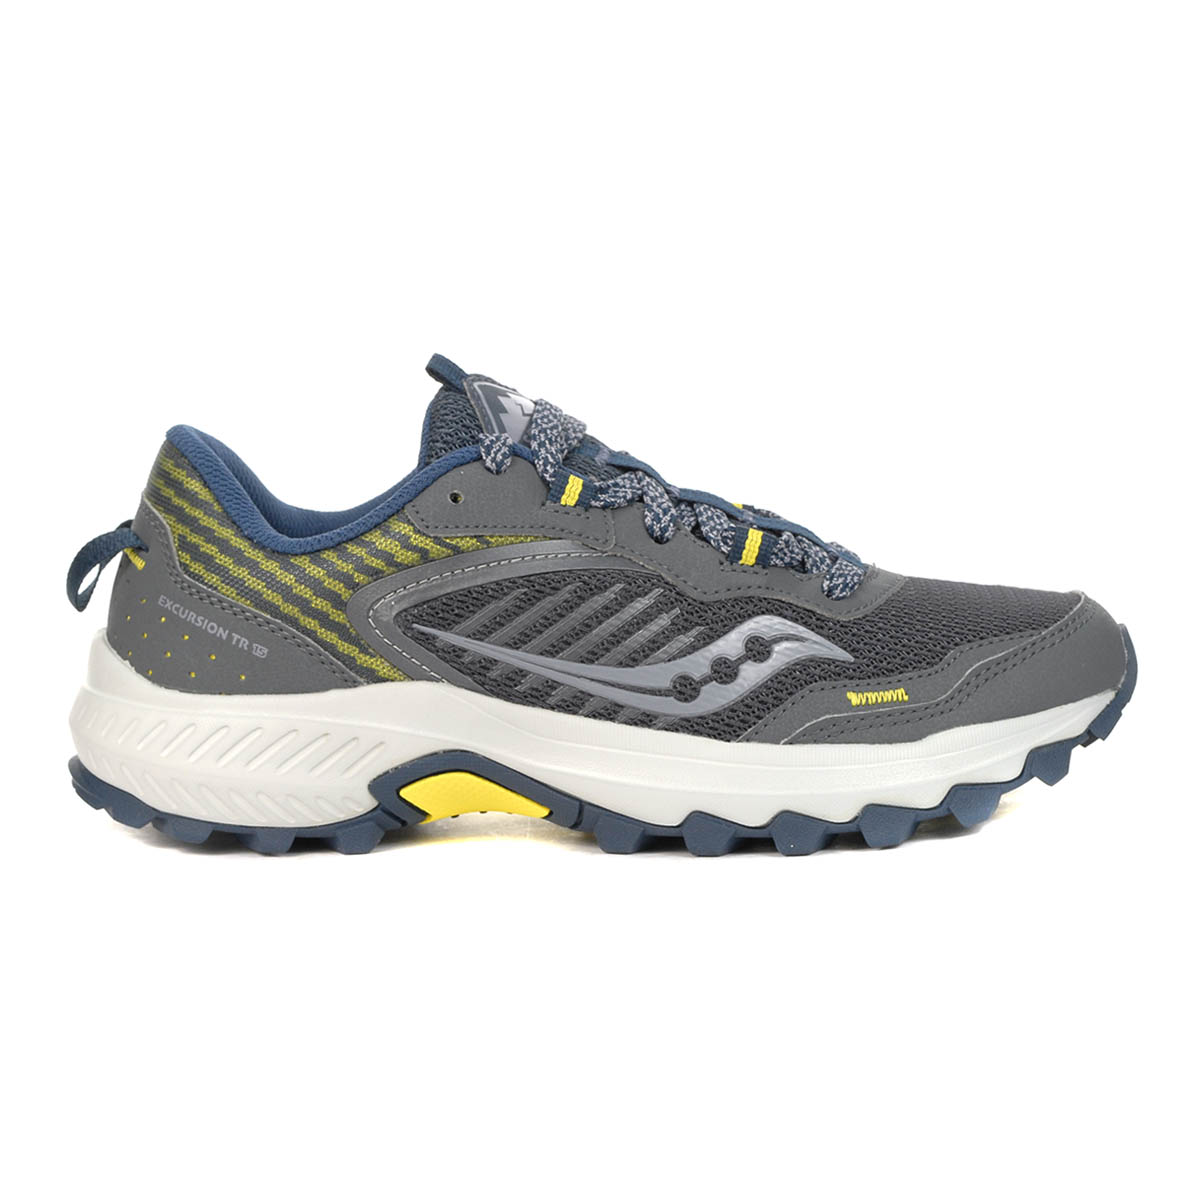 Saucony Women's Excursion TR15 Shadow/Sunblaze Trail Running Shoes ...